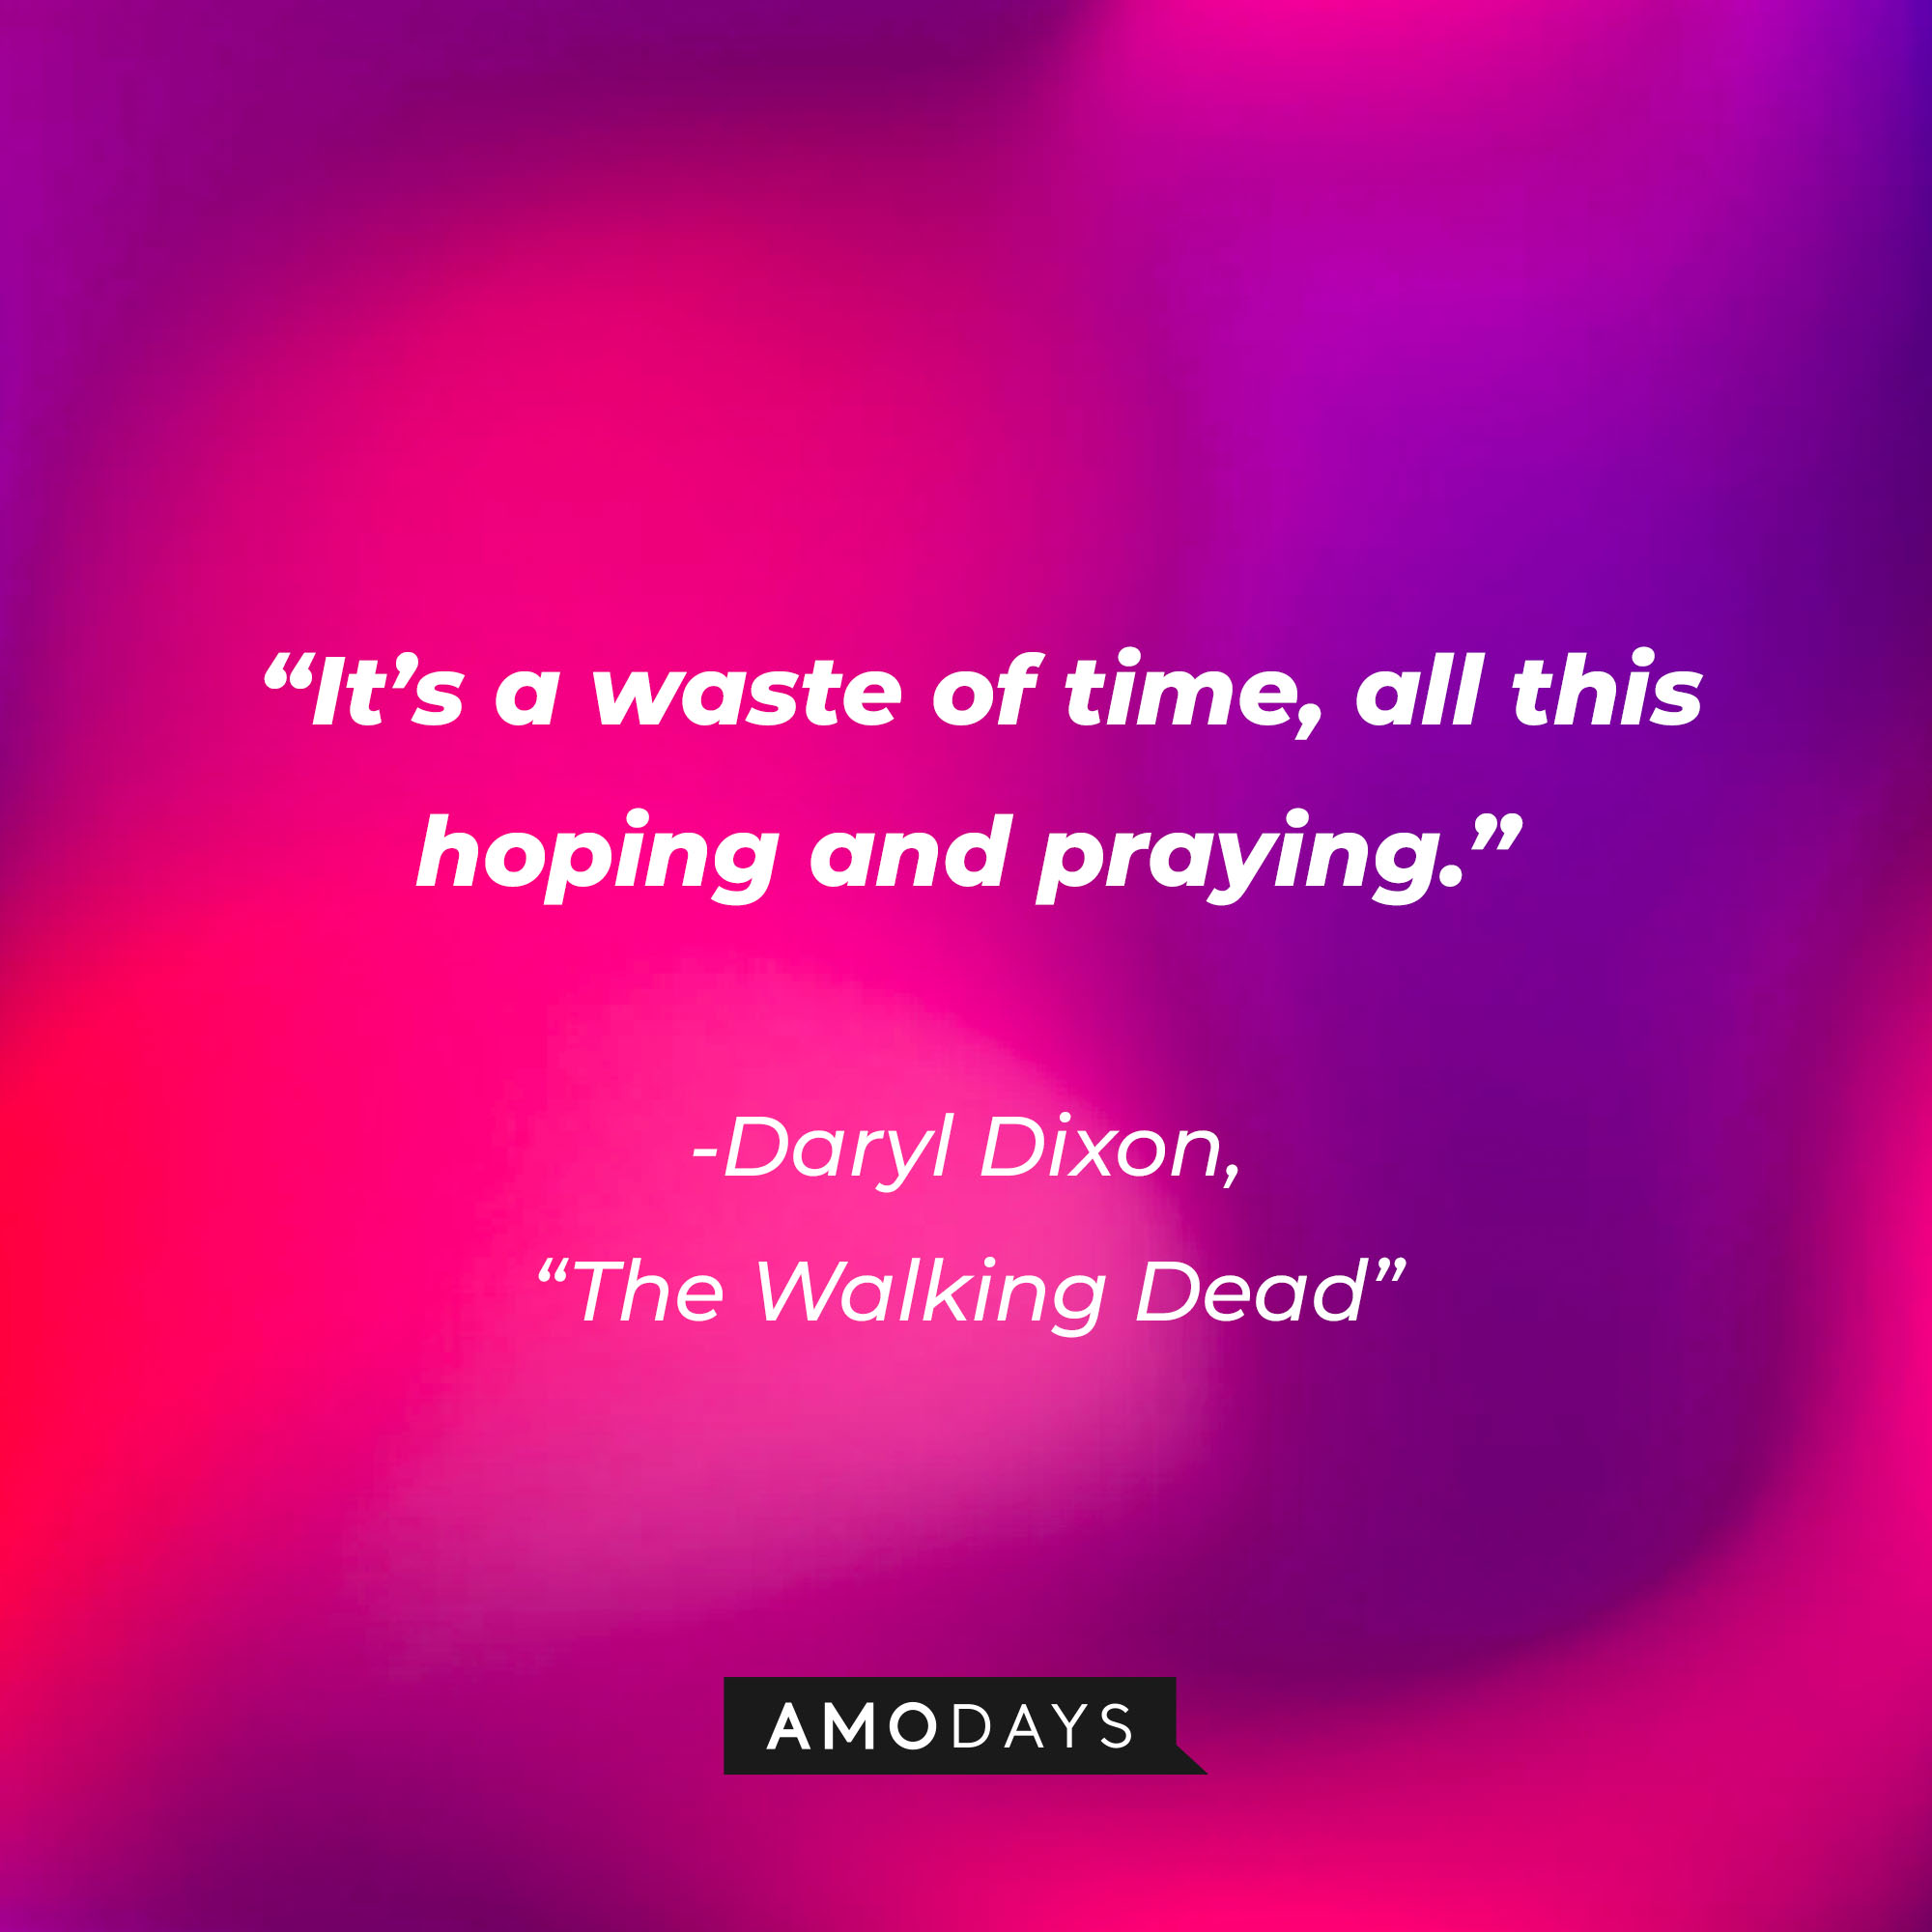 Daryl Dixon’s quote from “The Walking Dead”: “It’s a waste of time, all this hoping and praying.” | Source: AmoDays